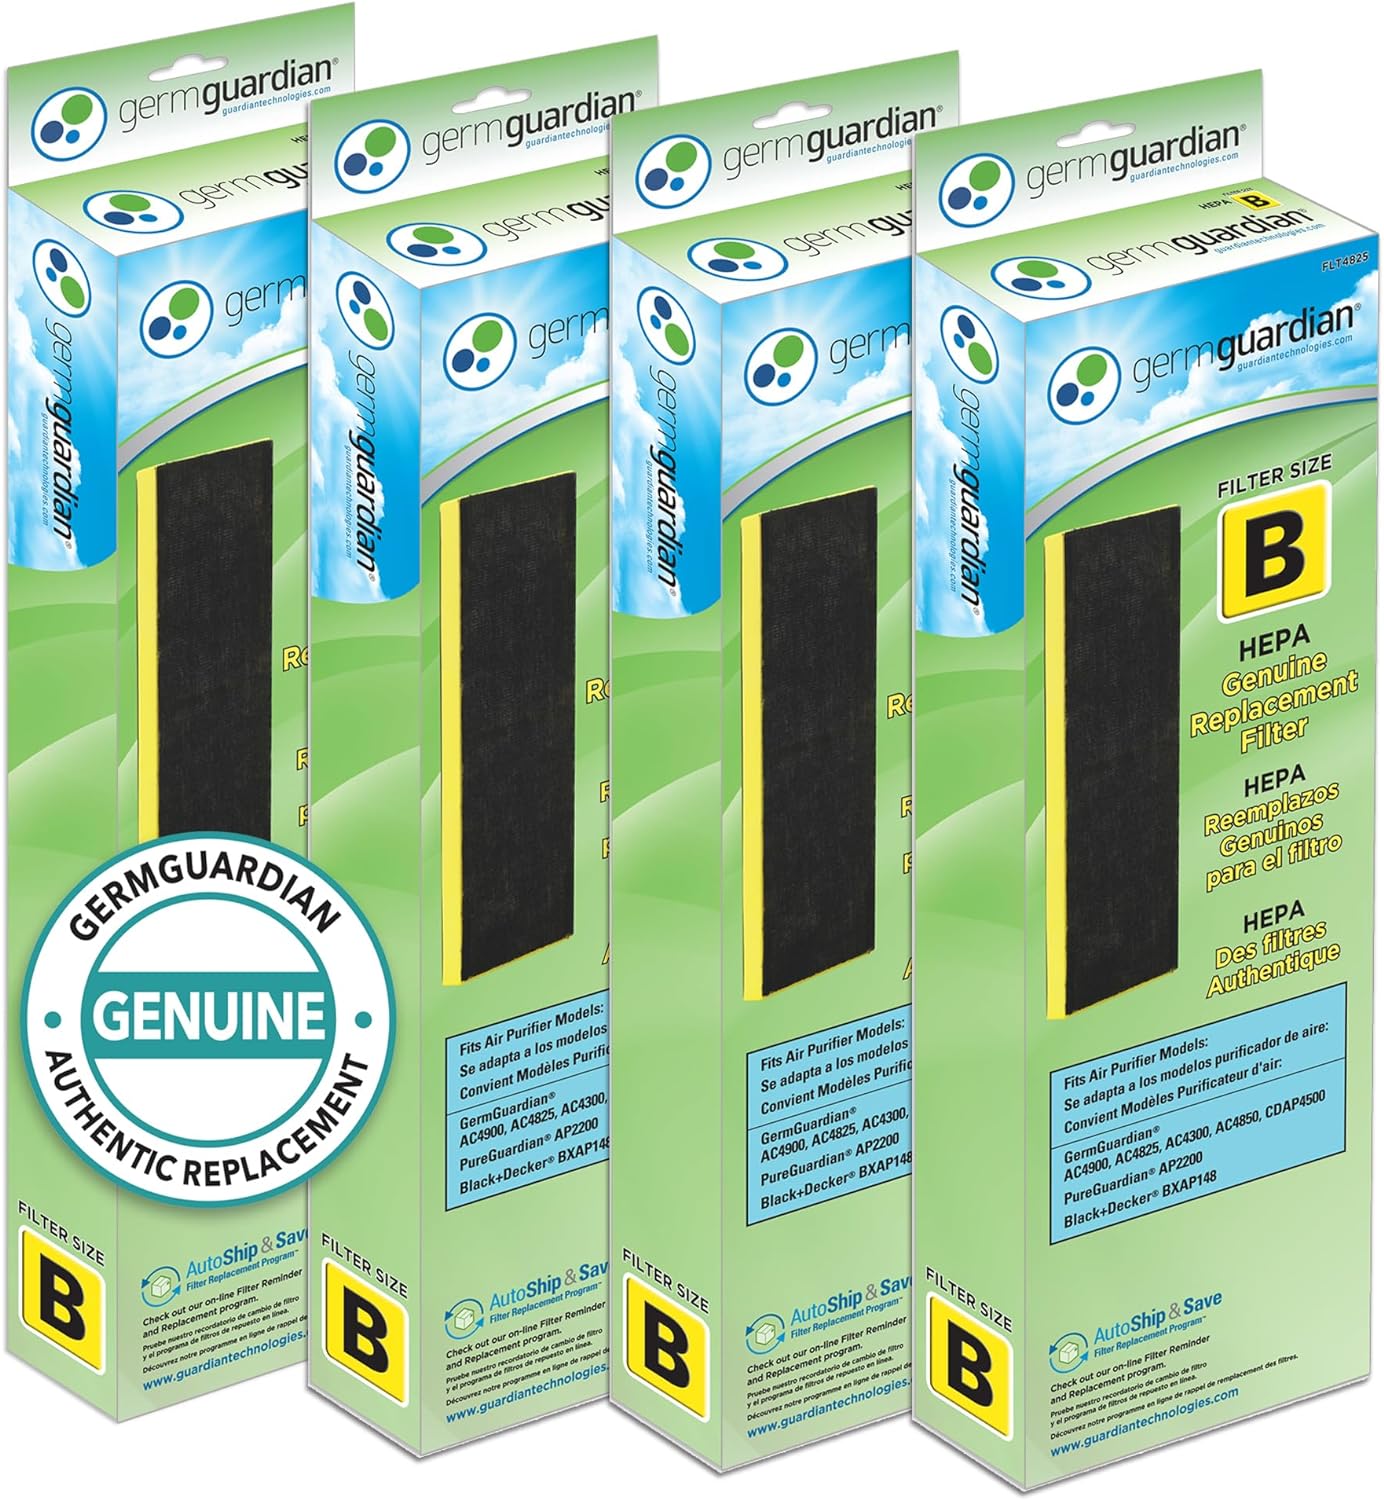 GermGuardian Filter B HEPA Pure Genuine Replacement Filter, Removes 99.97% of Pollutants for AC4825, AC4300, AC4900, AC4825DLX, AC4850, CDAP4500, AP2200, 4-Pack, Black/Yellow, FLT48254PK